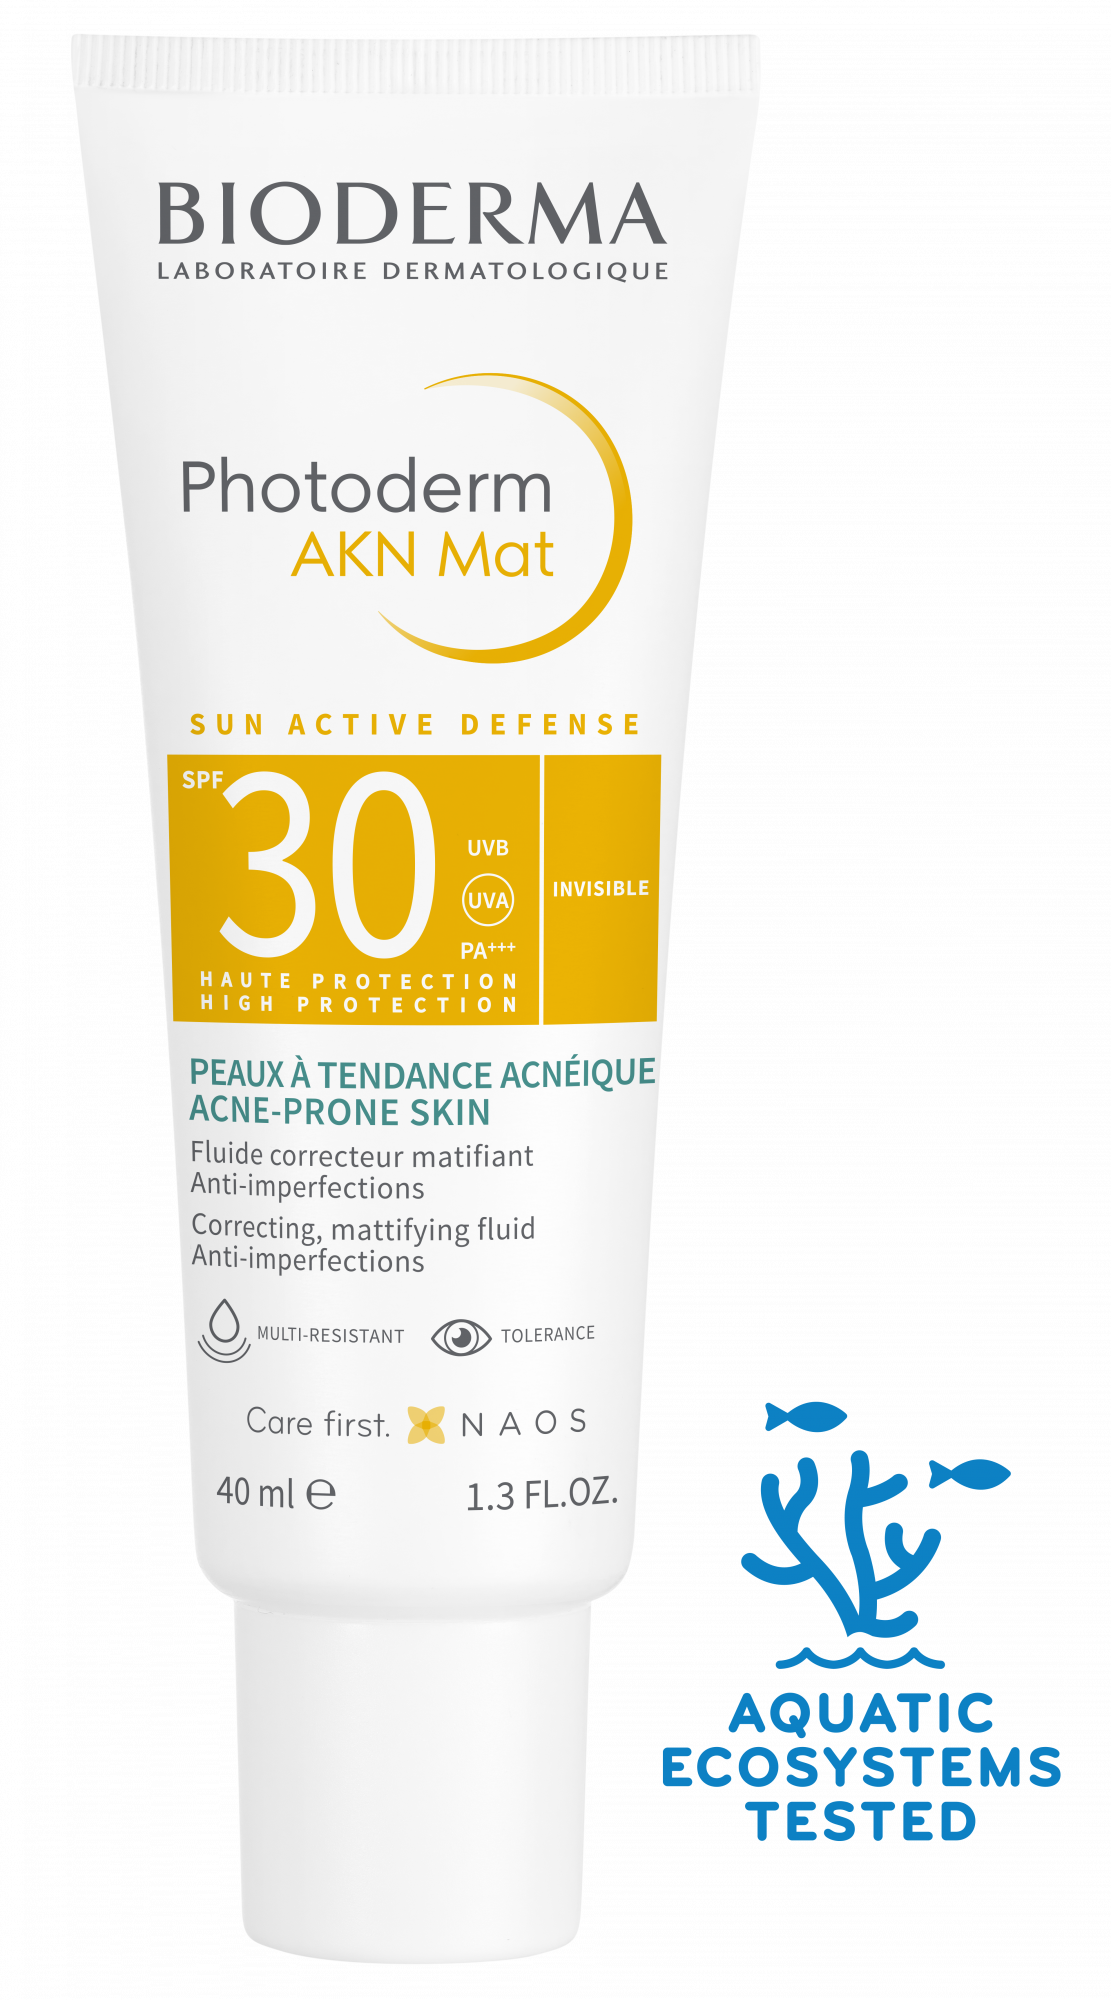 Photoderm AKN Mat SPF30  Anti-blemish sunscreen for oily to acne-prone skin